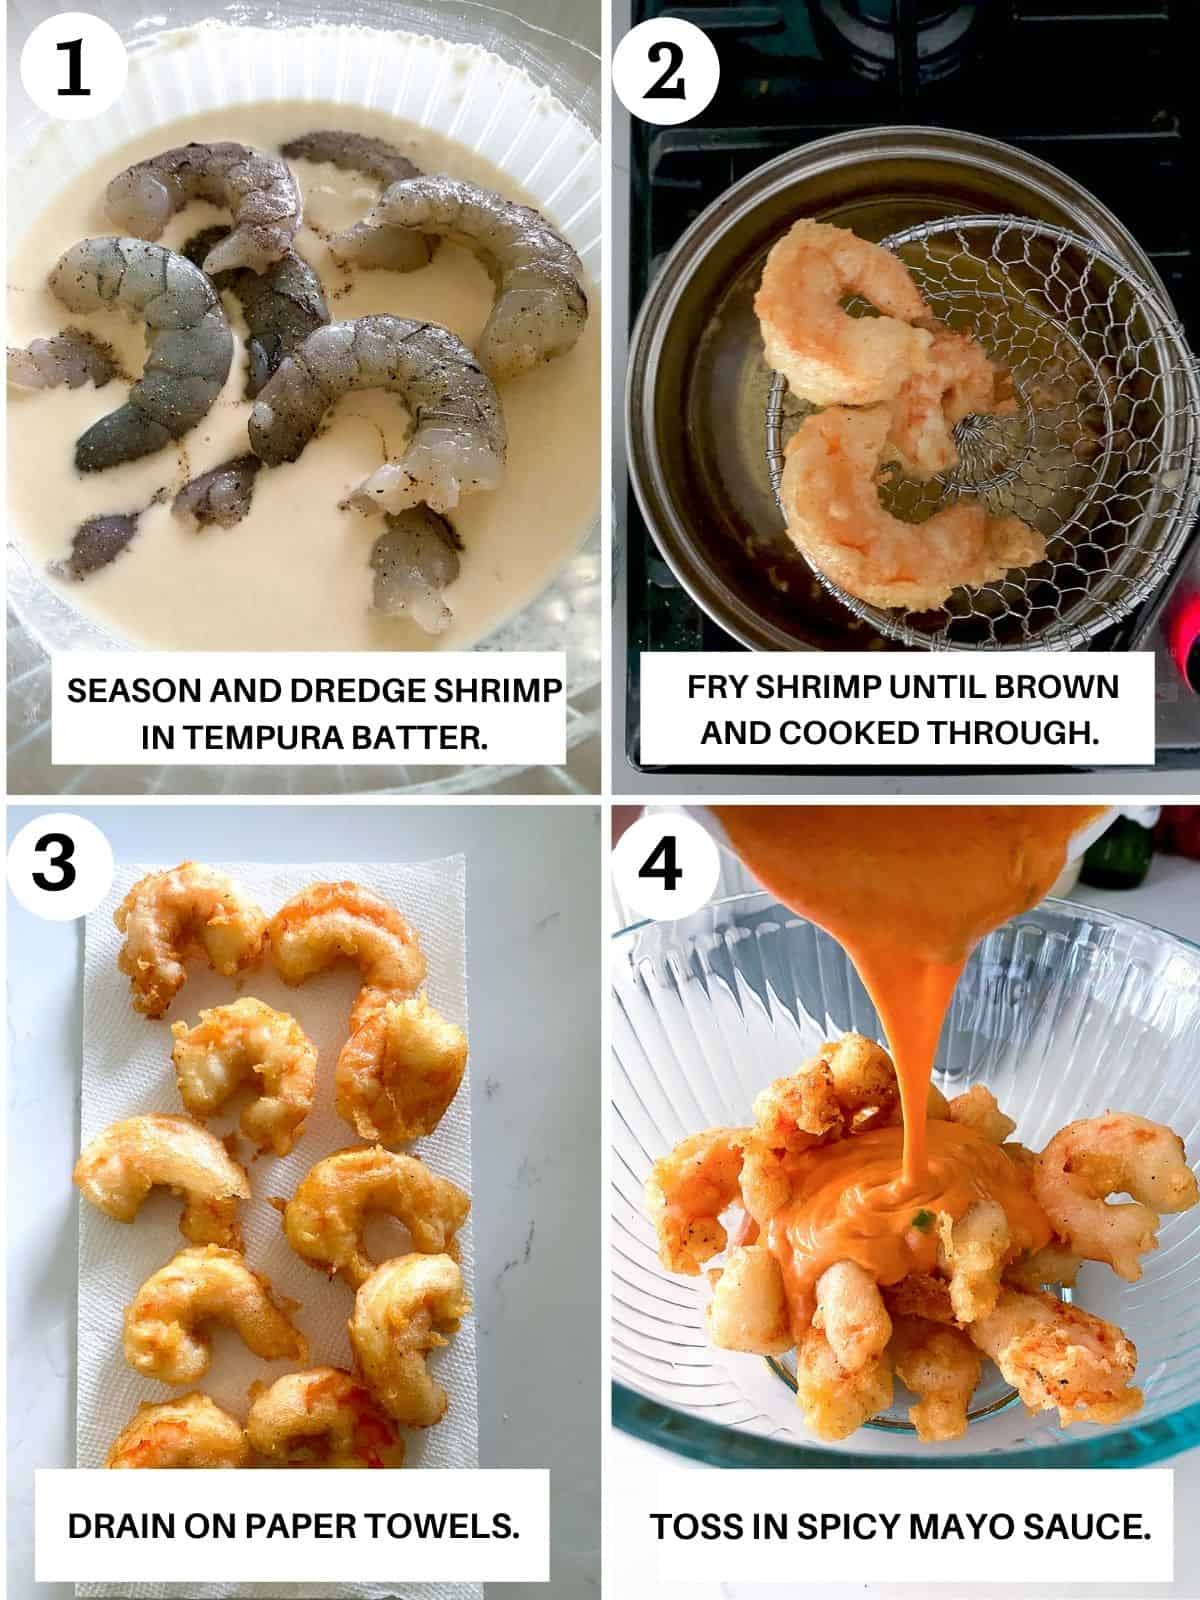 Step by step photos showing how to dredge, season and coat dynamite shrimp.